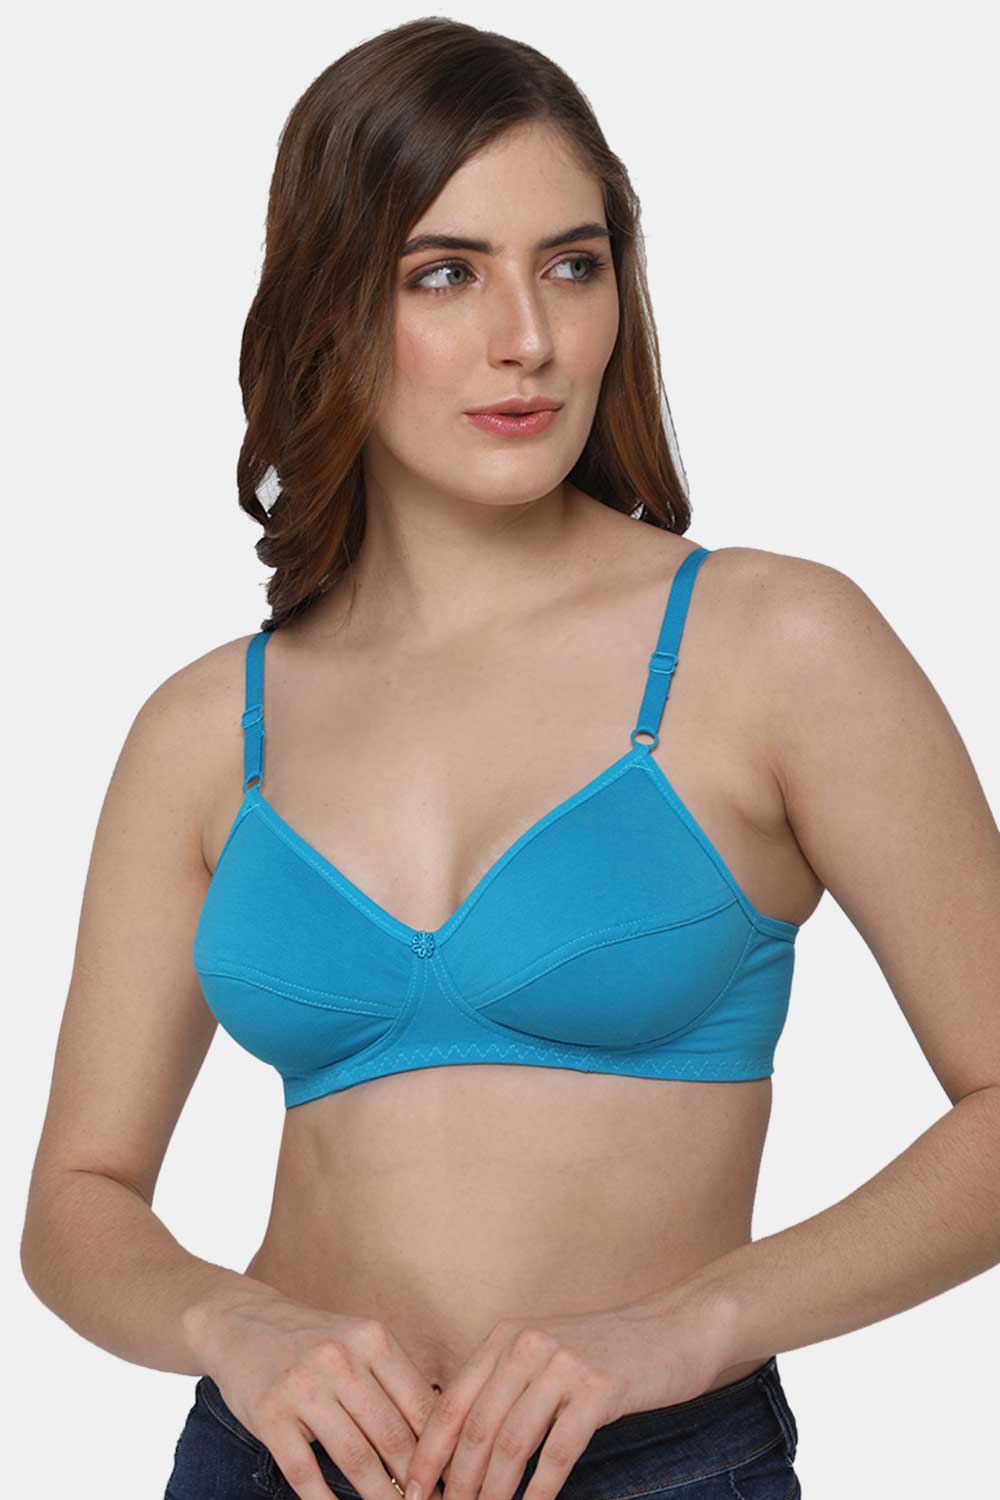 Buy Naidu Hall Bra for Women, Non-Padded, Non-Wired